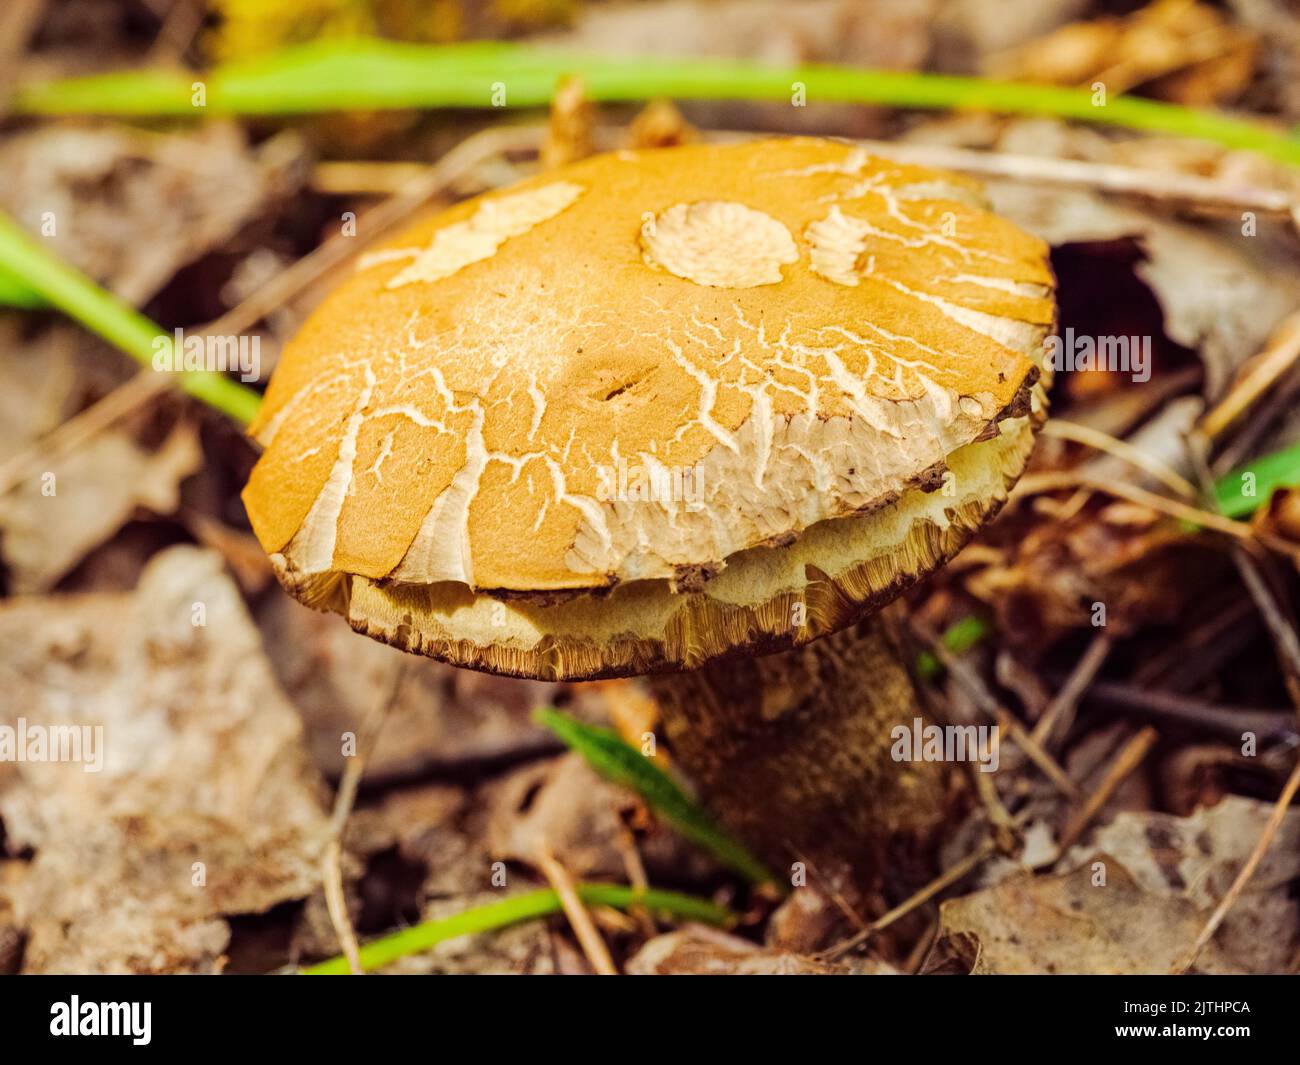 Leccinum mushroom with chewed and cracked cap among the grass and foliage Stock Photo